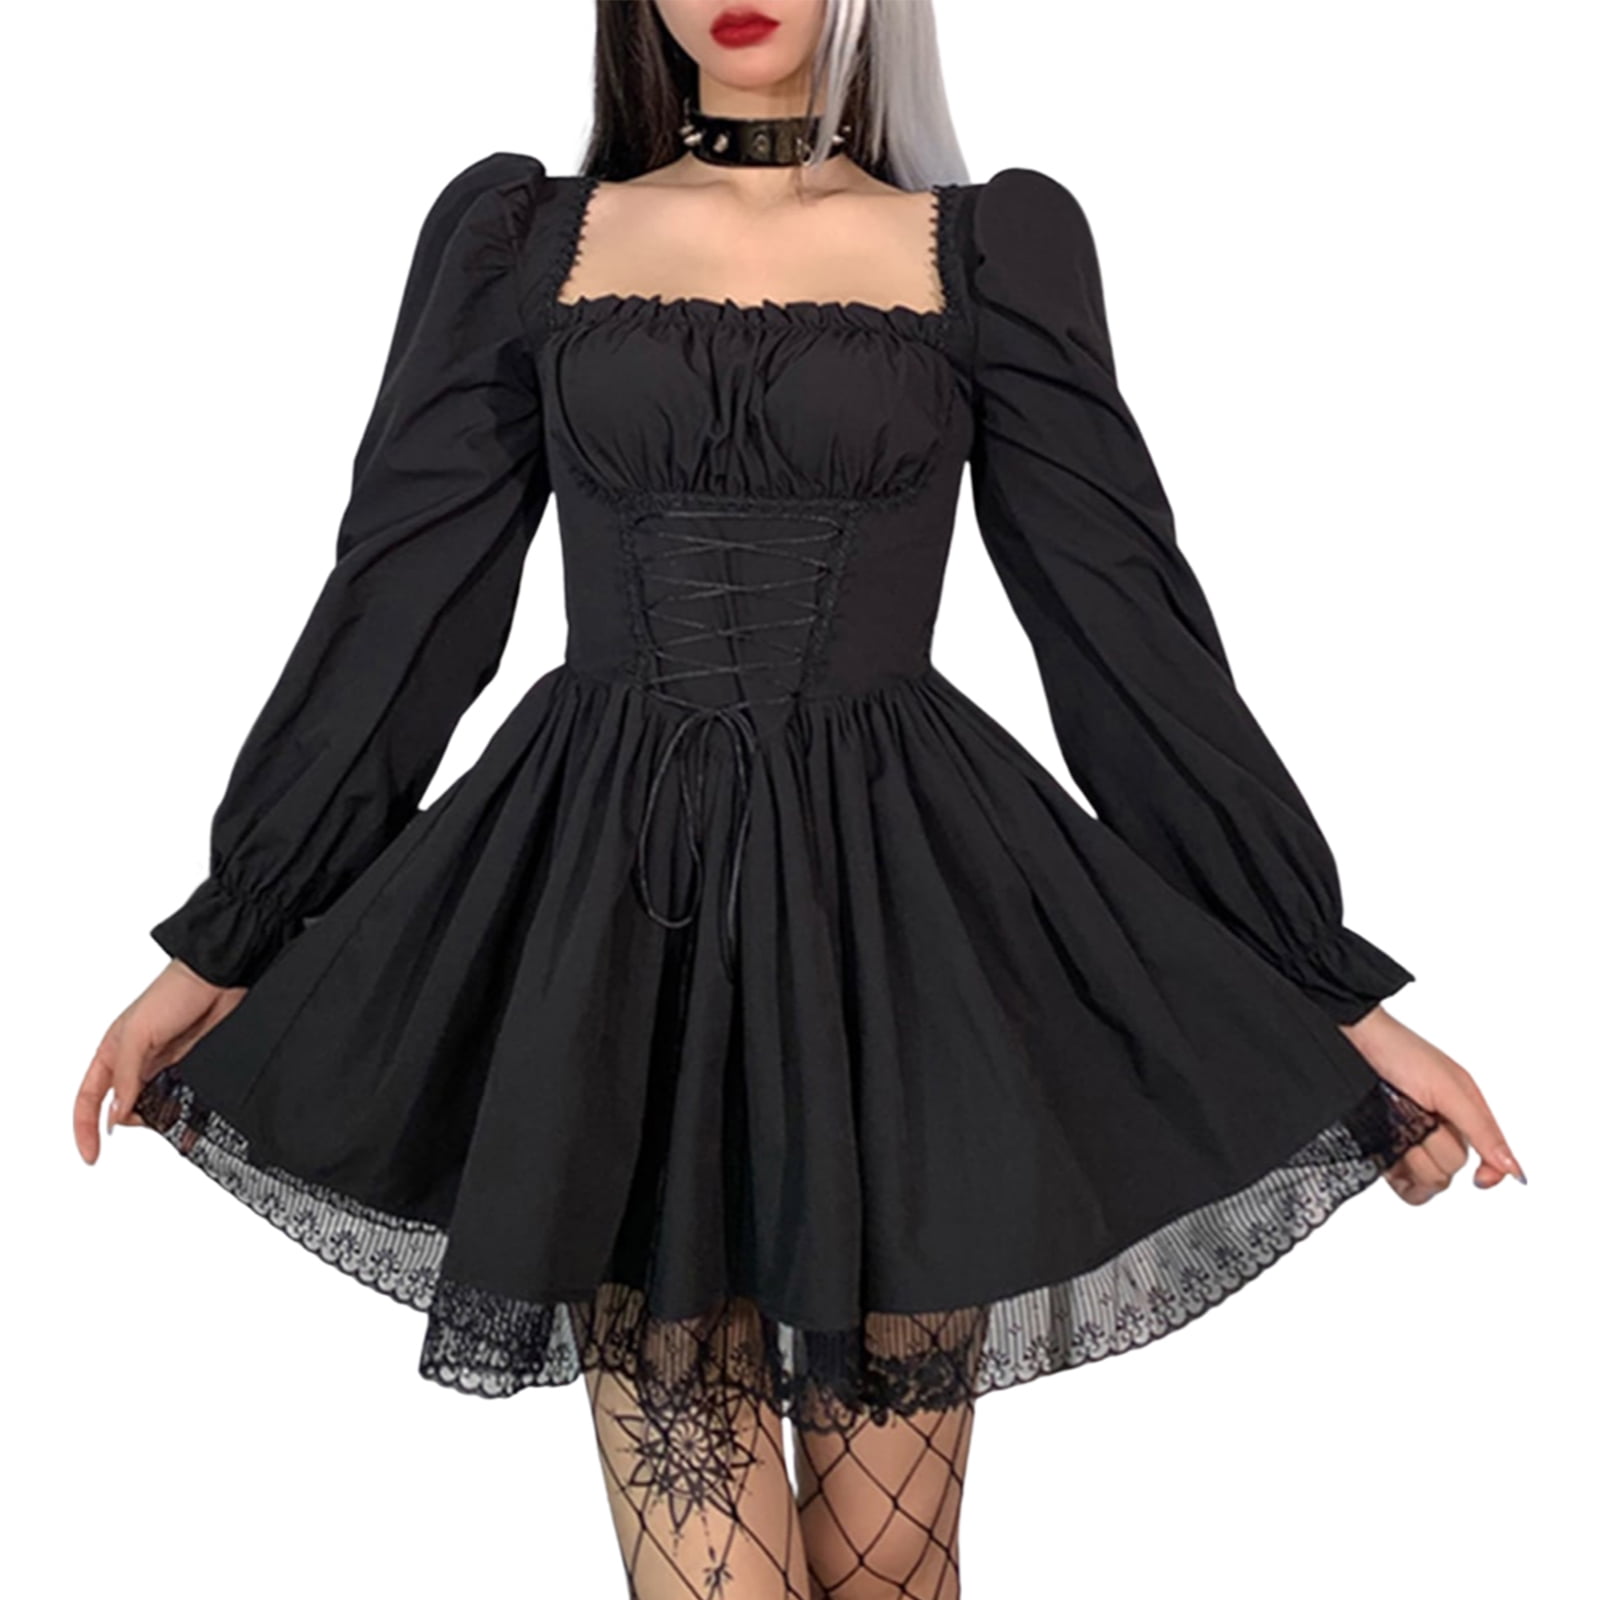 Plus Size Dresses for Women Gothic Vintage Costume Sexy Cold Shoulder Mini  Dress Flared Sleeve Ruffle Goth Club Dress 